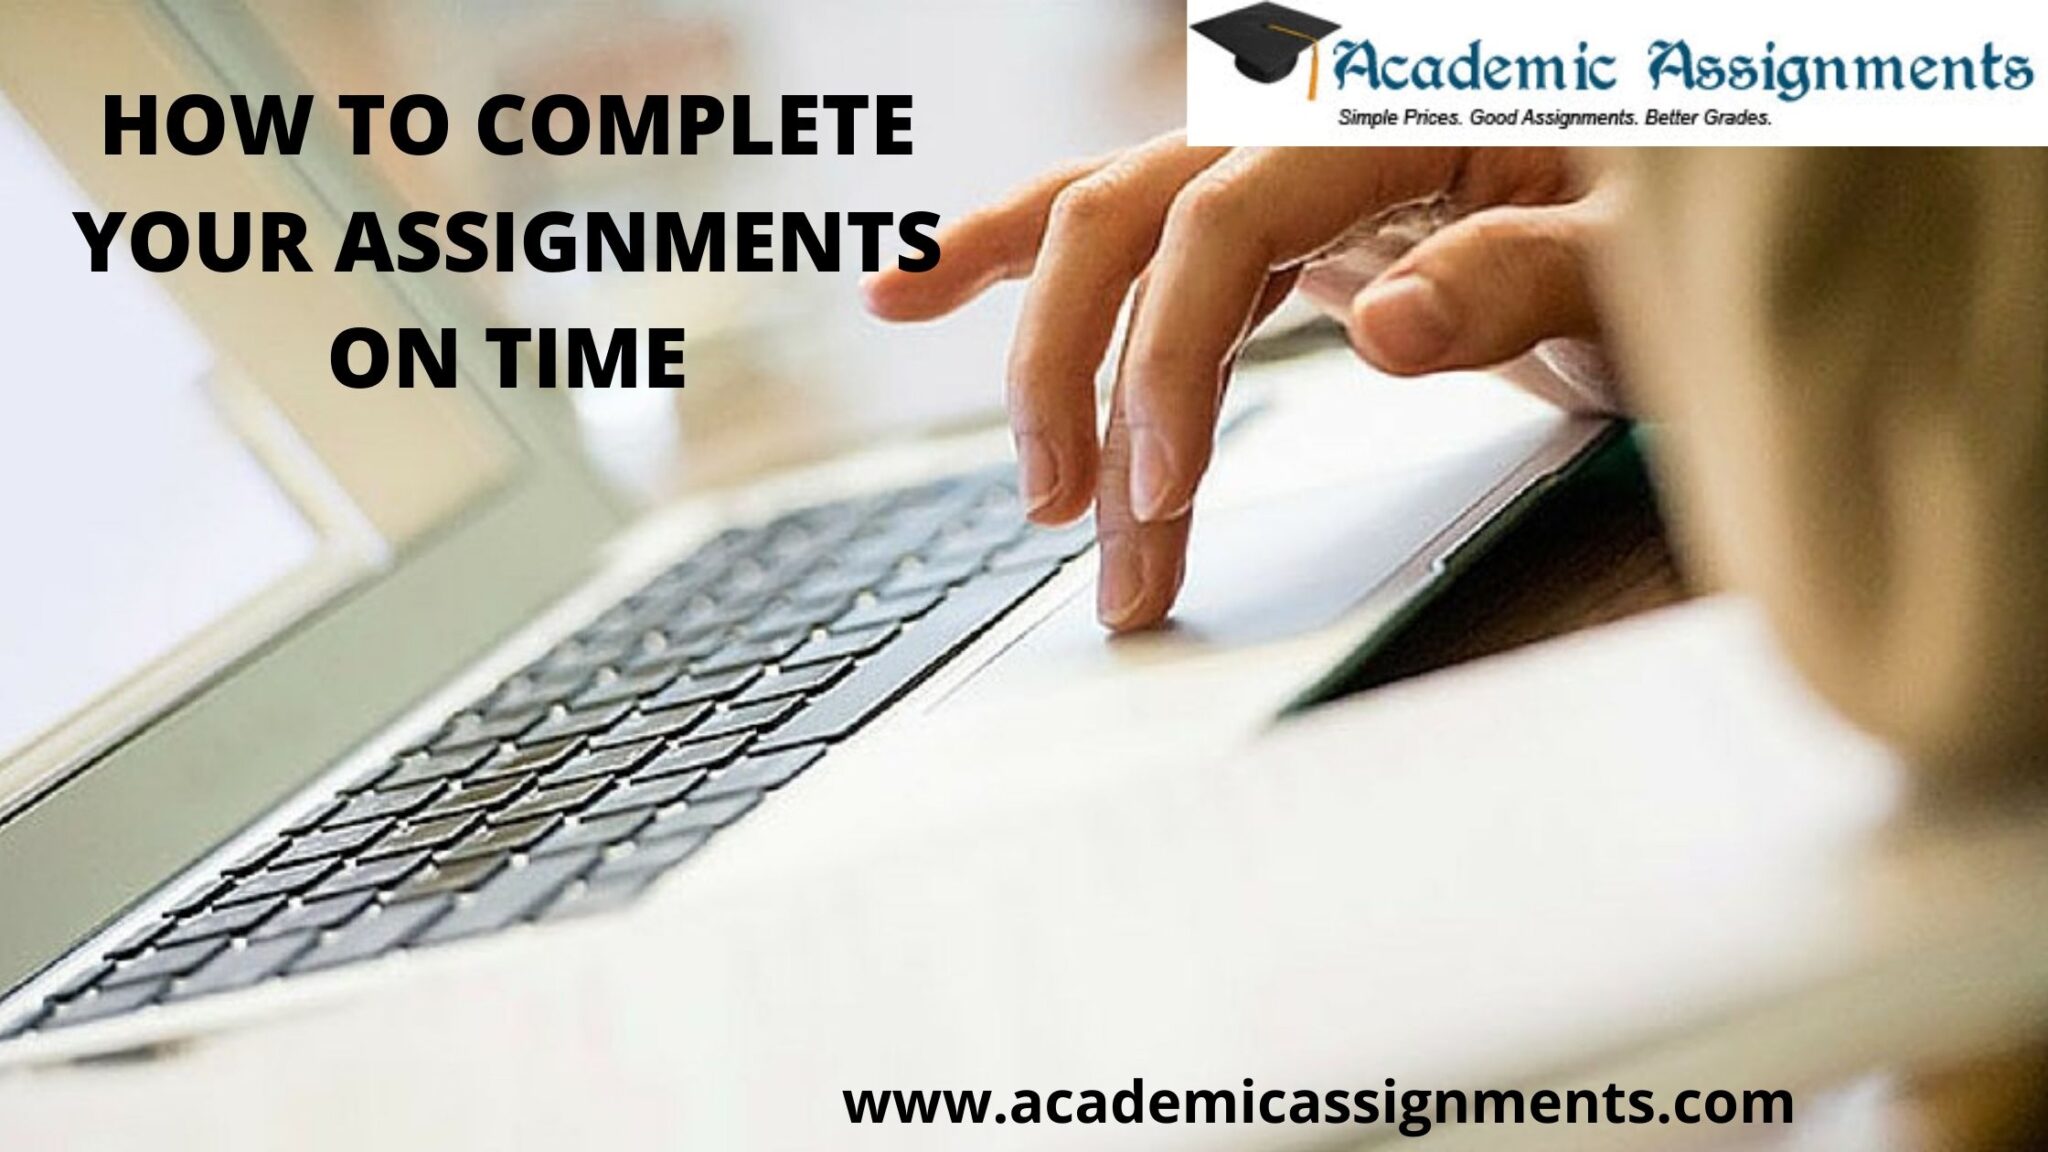 send in your assignments on time